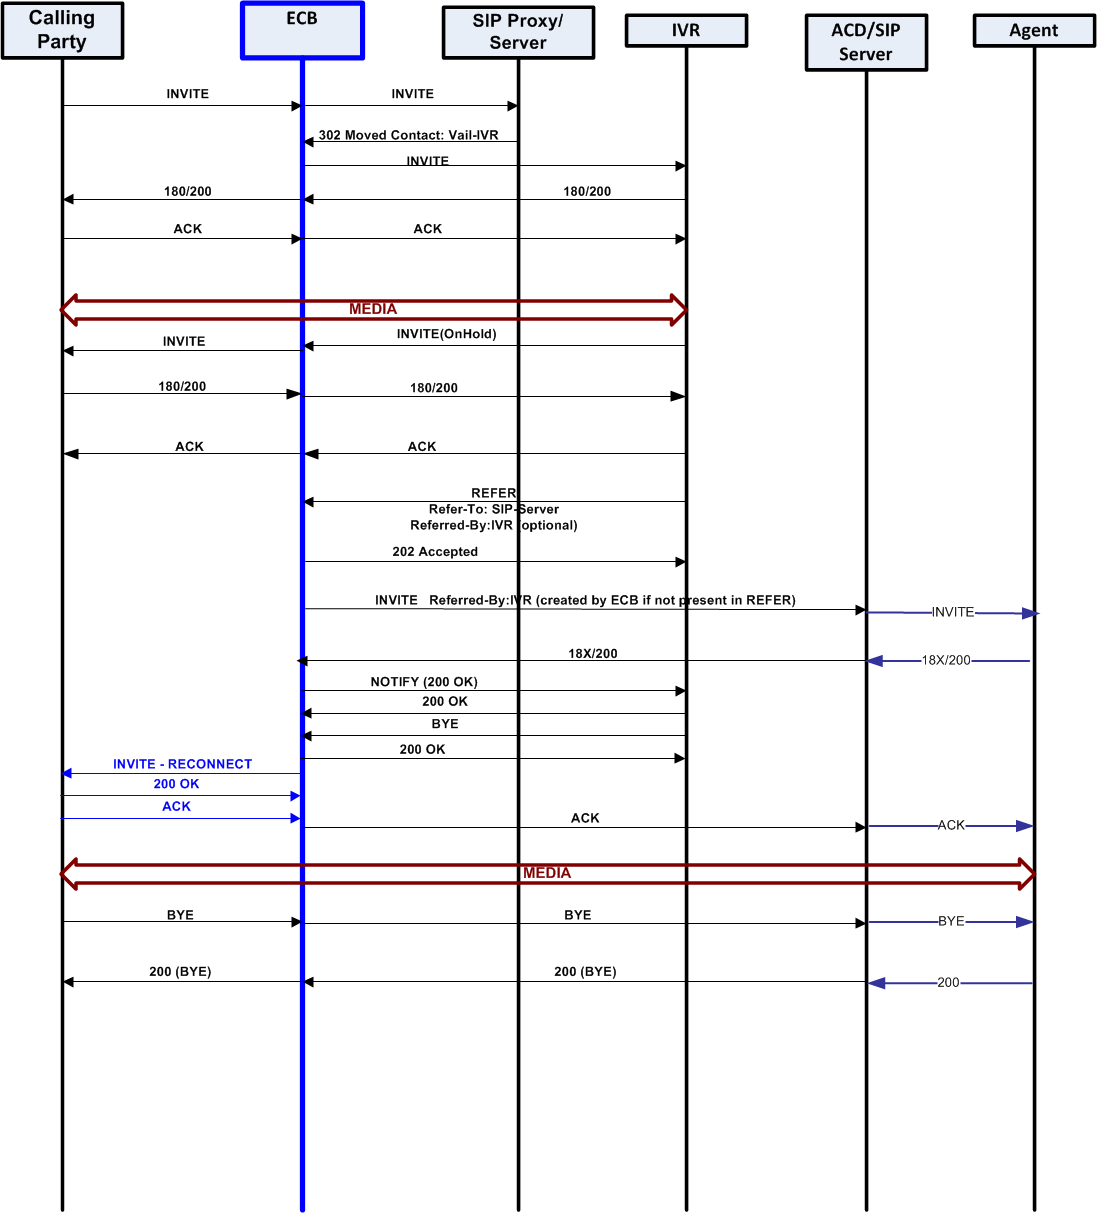 This ladder diagram shows unattended call transfer from the calling party to the ECB to the SIP Proxy to the IVR to the ACD/SIP server to the Agent and back.